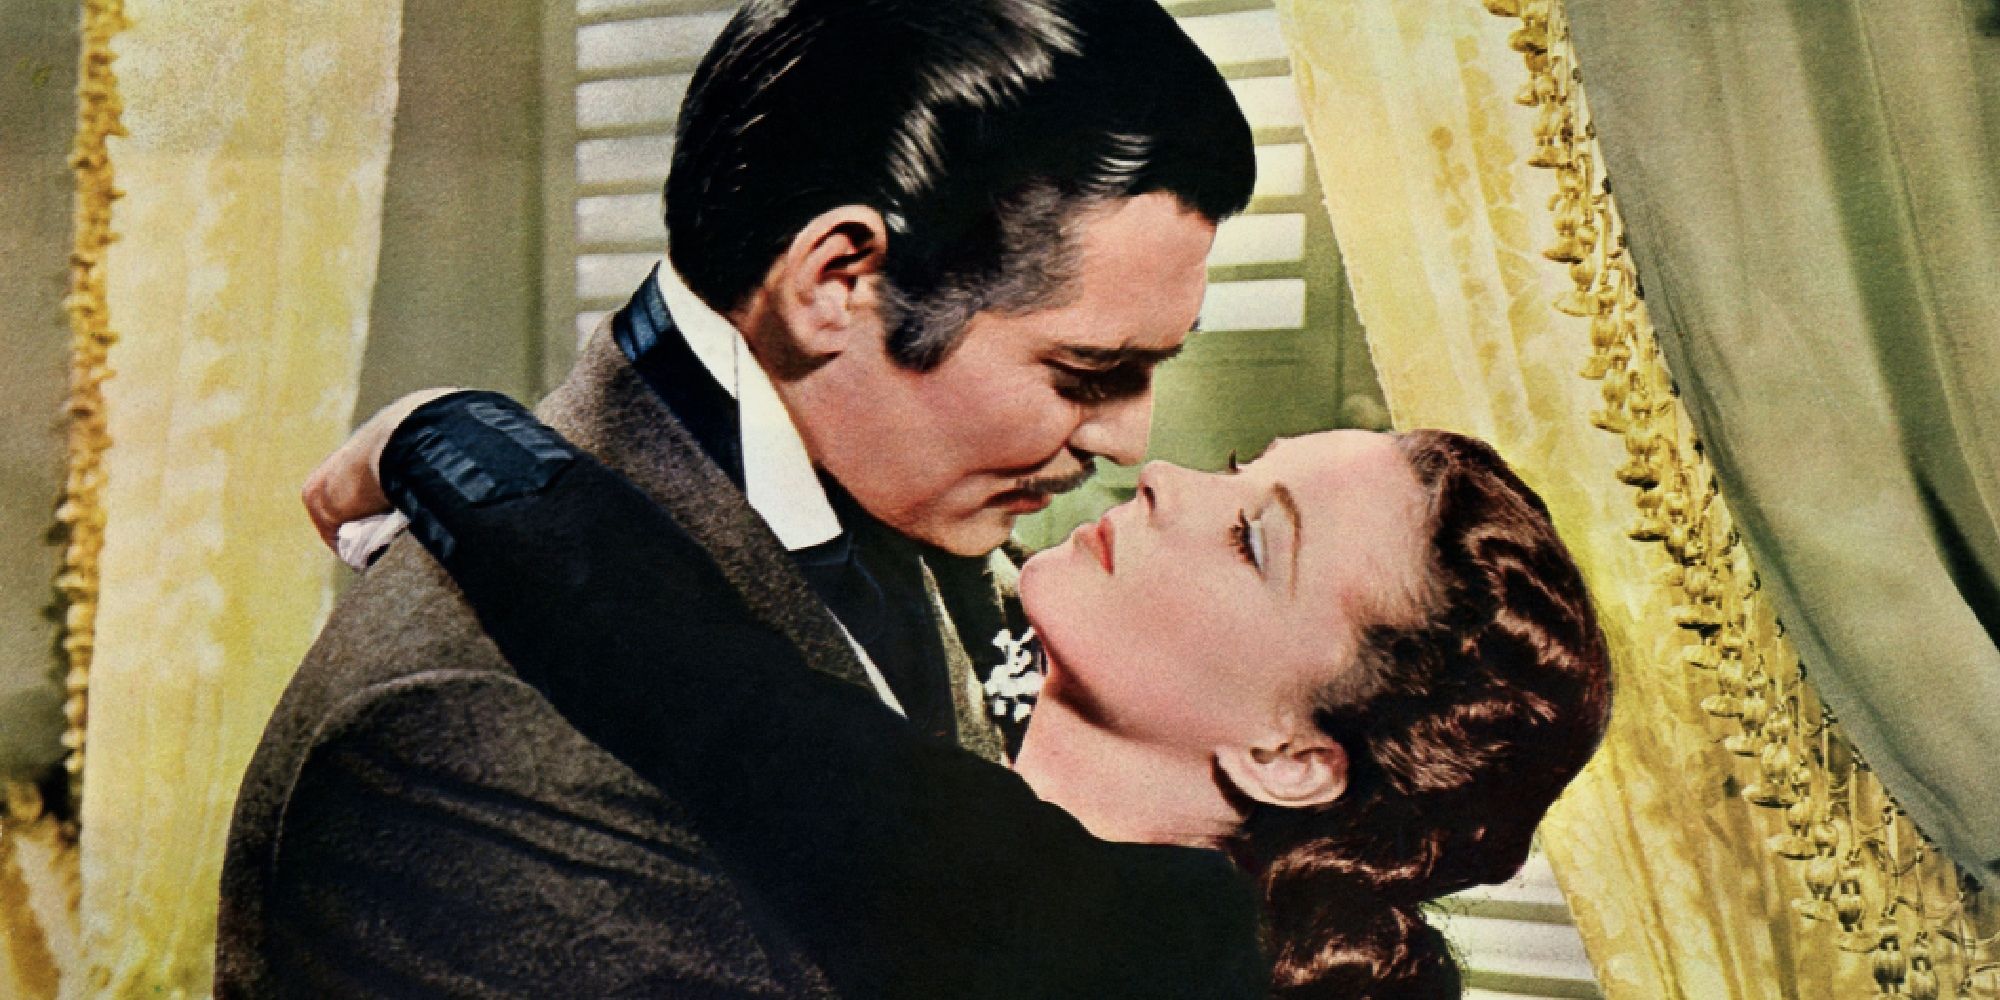 Rhett and Scarlet embracing and about to kiss in Gone with the Wind